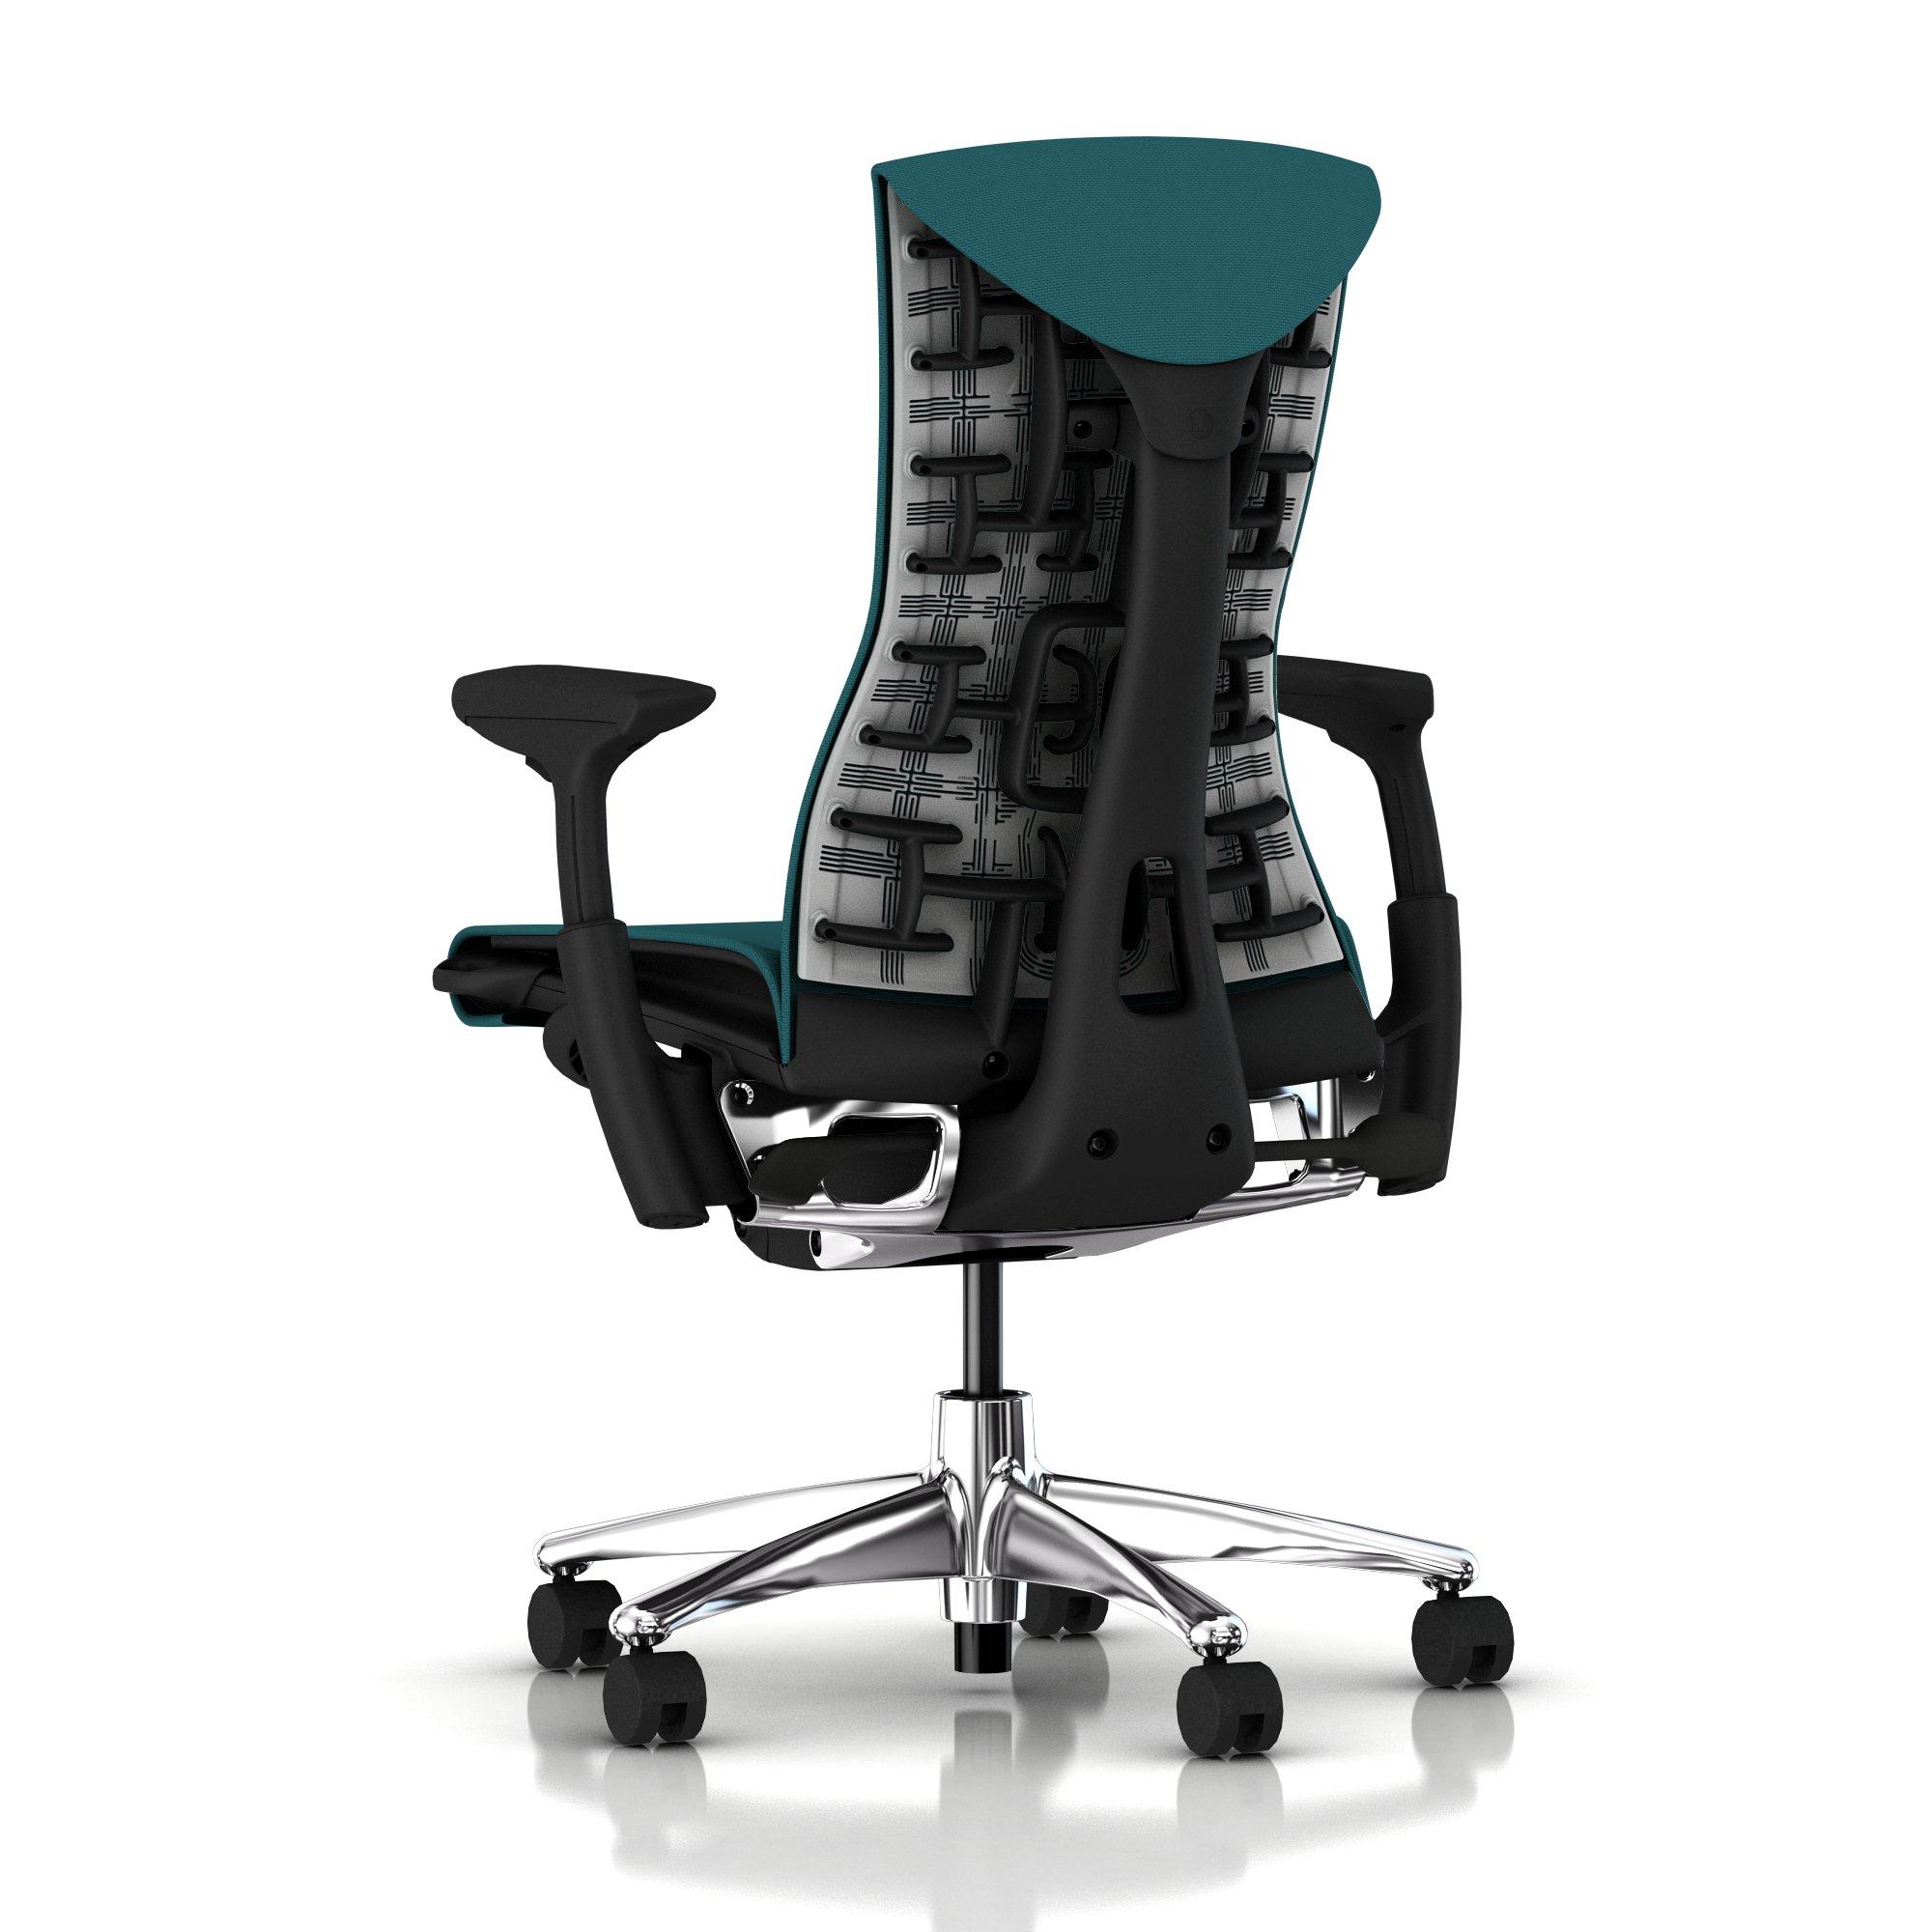 Herman Miller Embody Chair Peacock Rhythm with Graphite Frame and Polished Aluminum Chrome Base. Aluminum Embody Home Office Task Chair by Herman Miller.